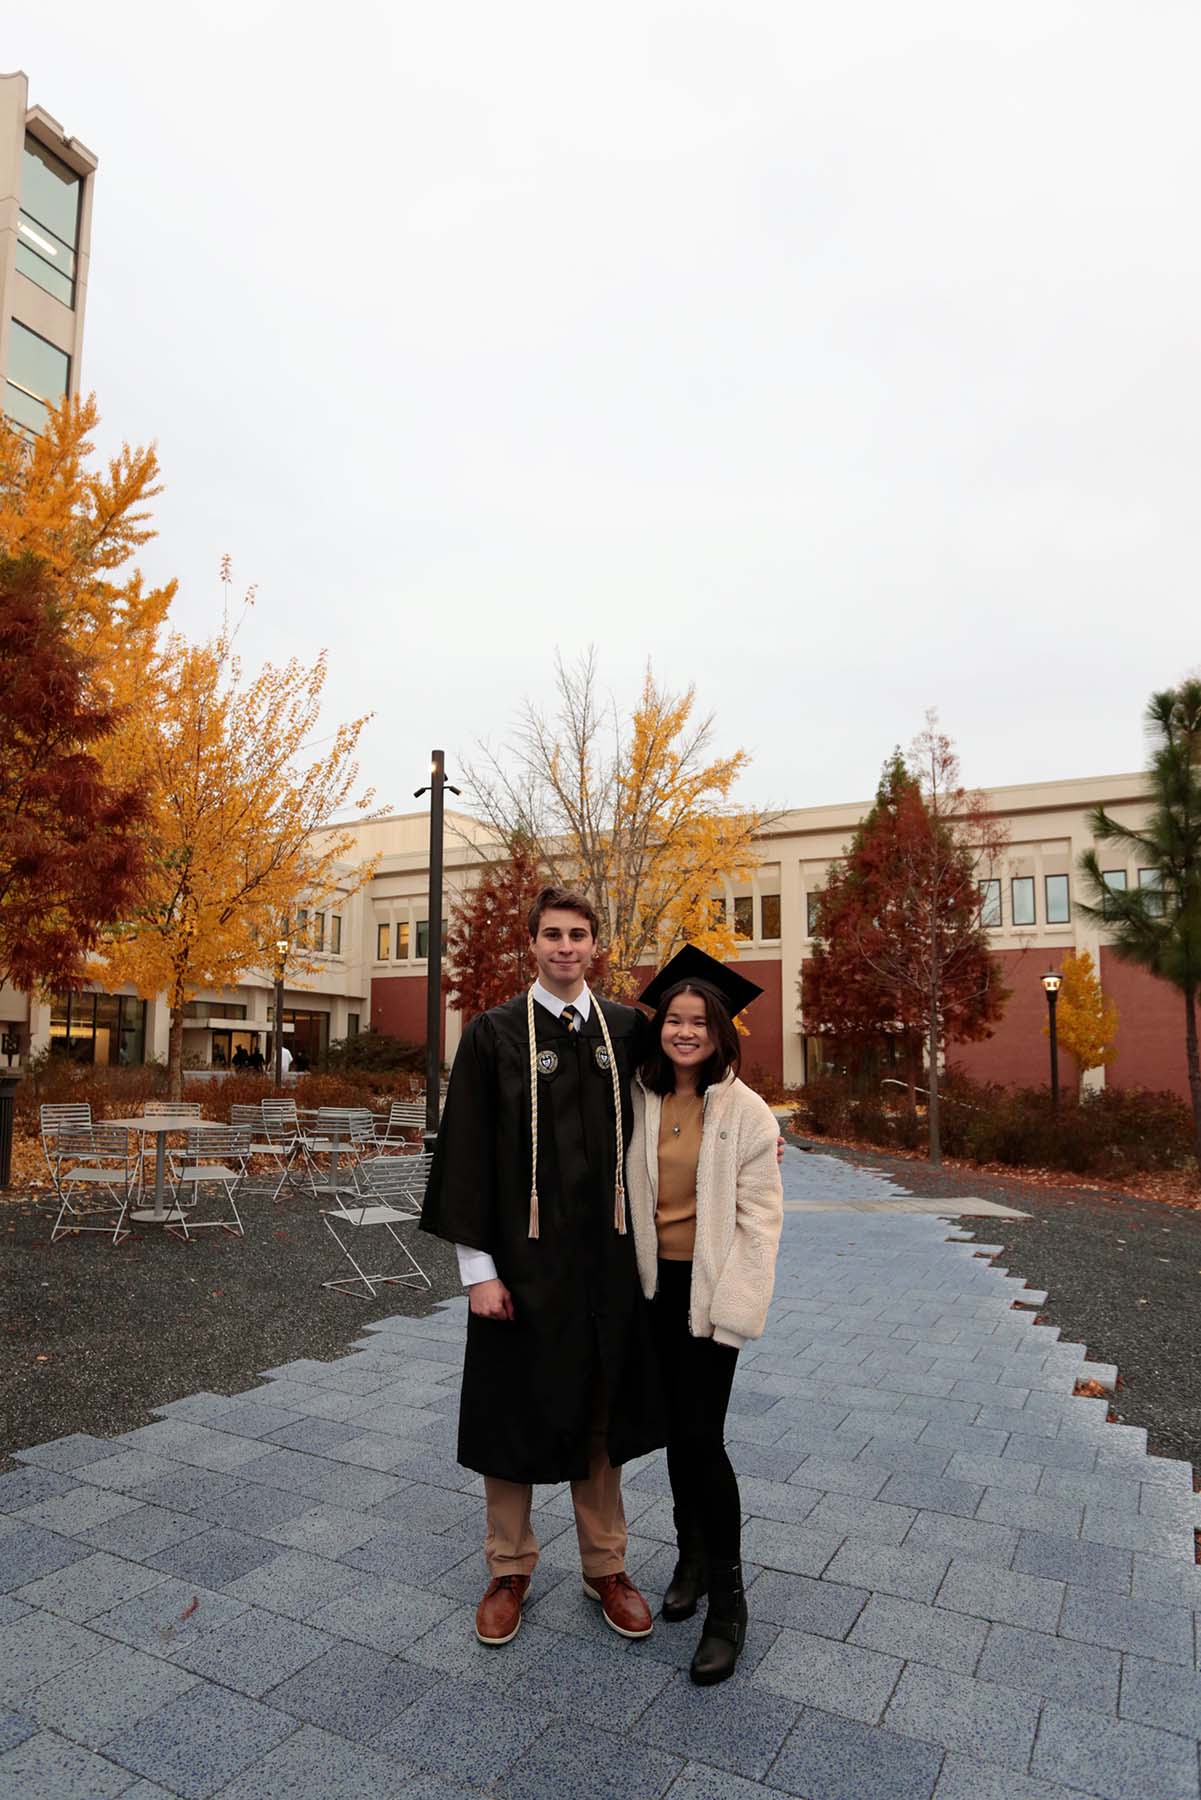 Physics grad Charles Cardot and computing grad Adrianna Brown bonded at Georgia Tech before getting married. Photo by Bruno Cardot